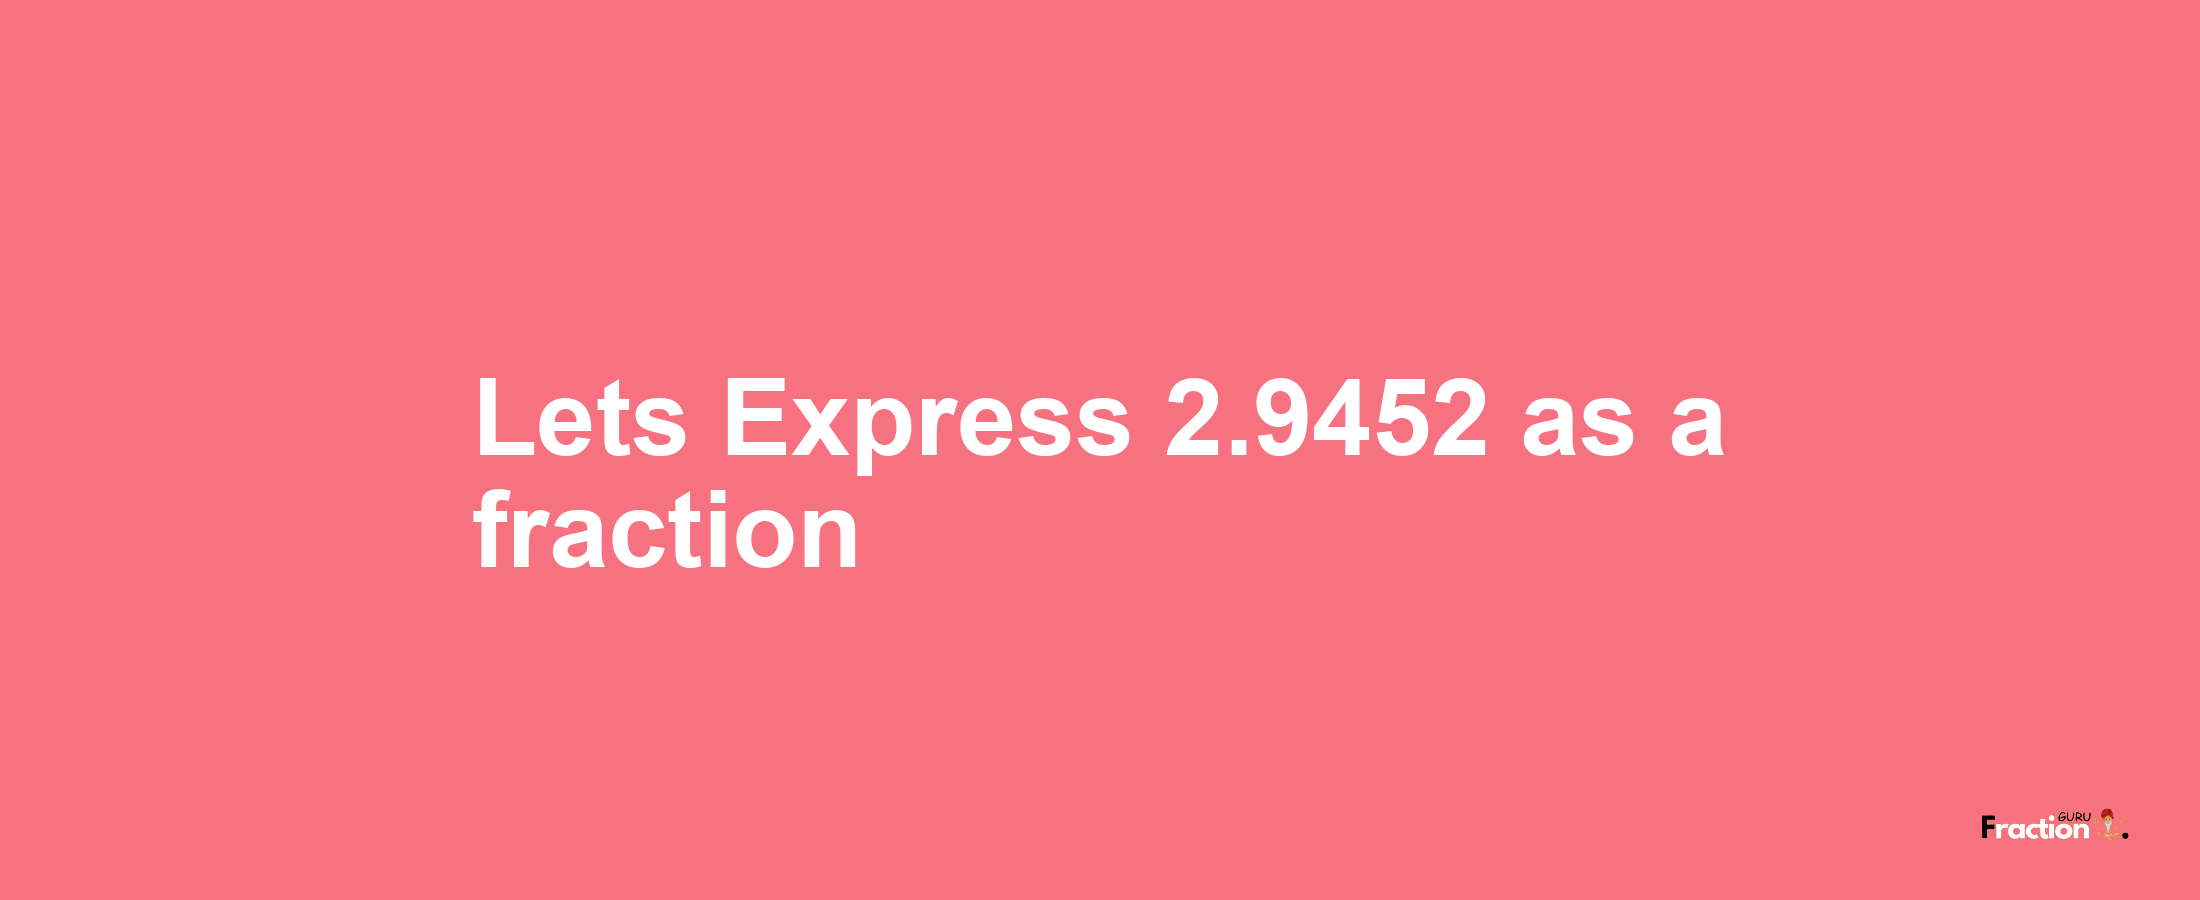 Lets Express 2.9452 as afraction